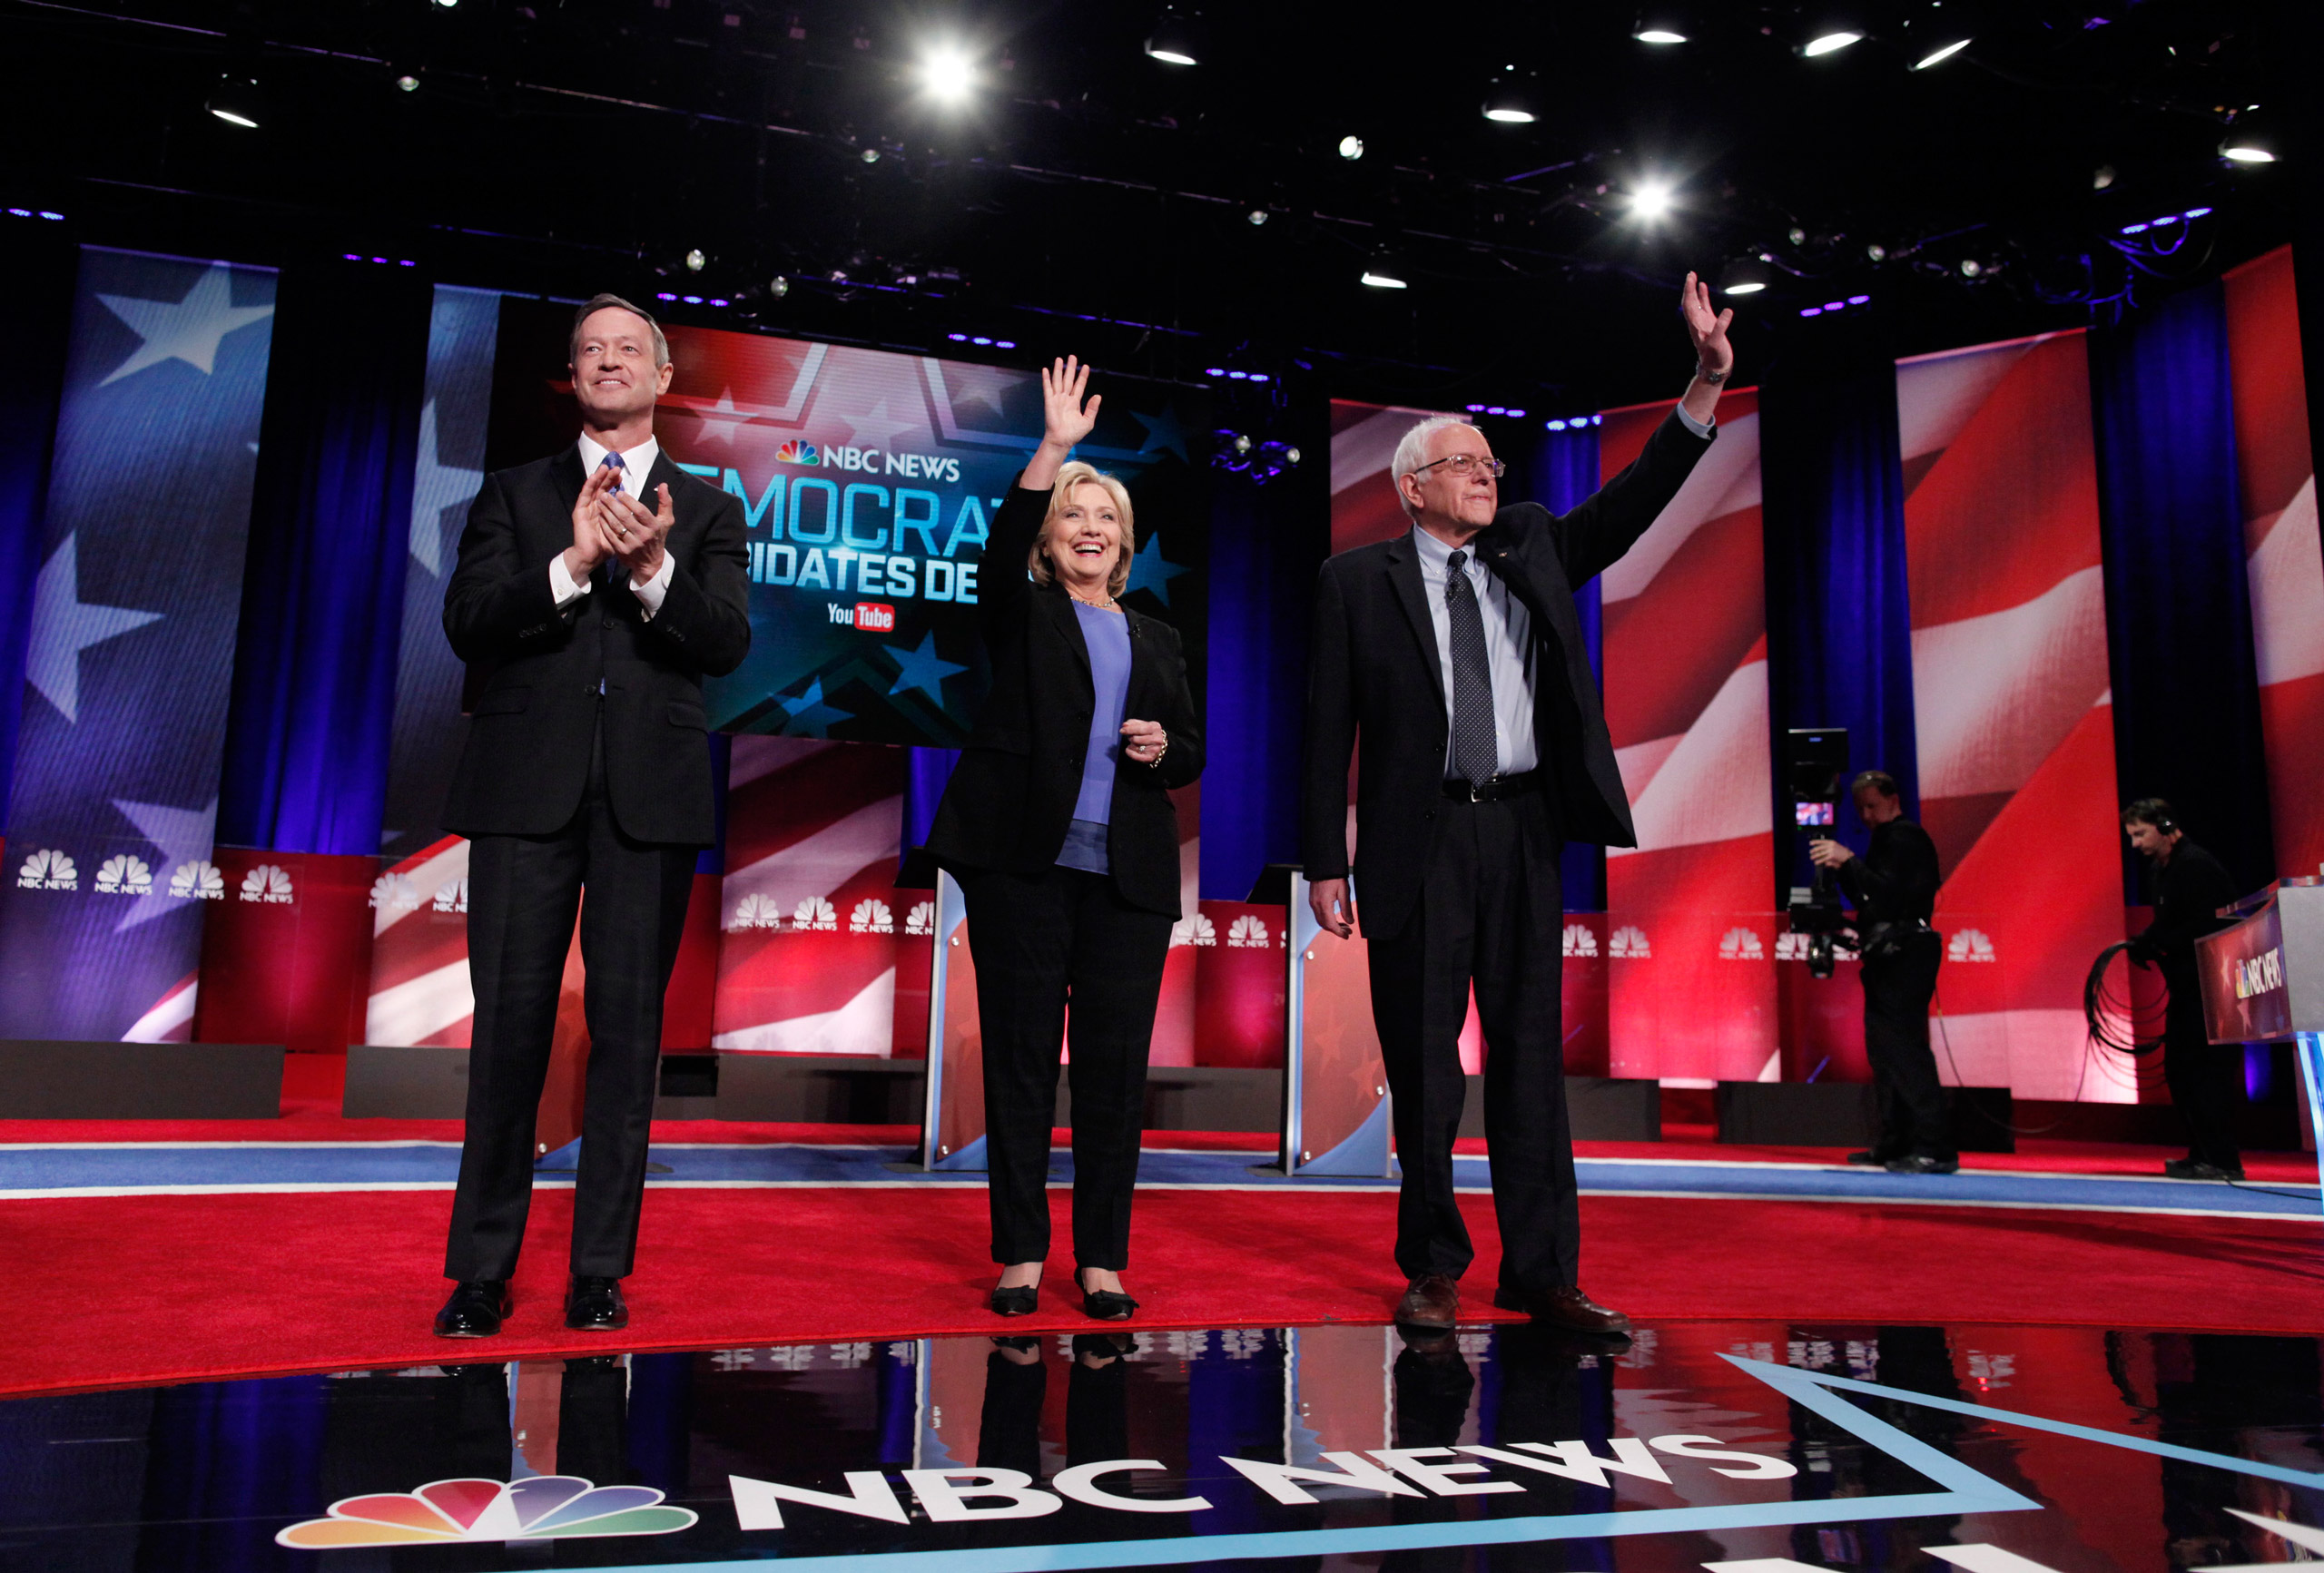 Democratic U.S. presidential candidates (L-R) former Governor Martin O'Malley, former Secretary of State Hillary Clinton and Senator Bernie Sanders pose together before the start of the NBC - YouTube Democratic presidential debate at the Gaillard Center in Charleston, S.C. on Jan. 17, 2016. (Randall Hill—Reuters)